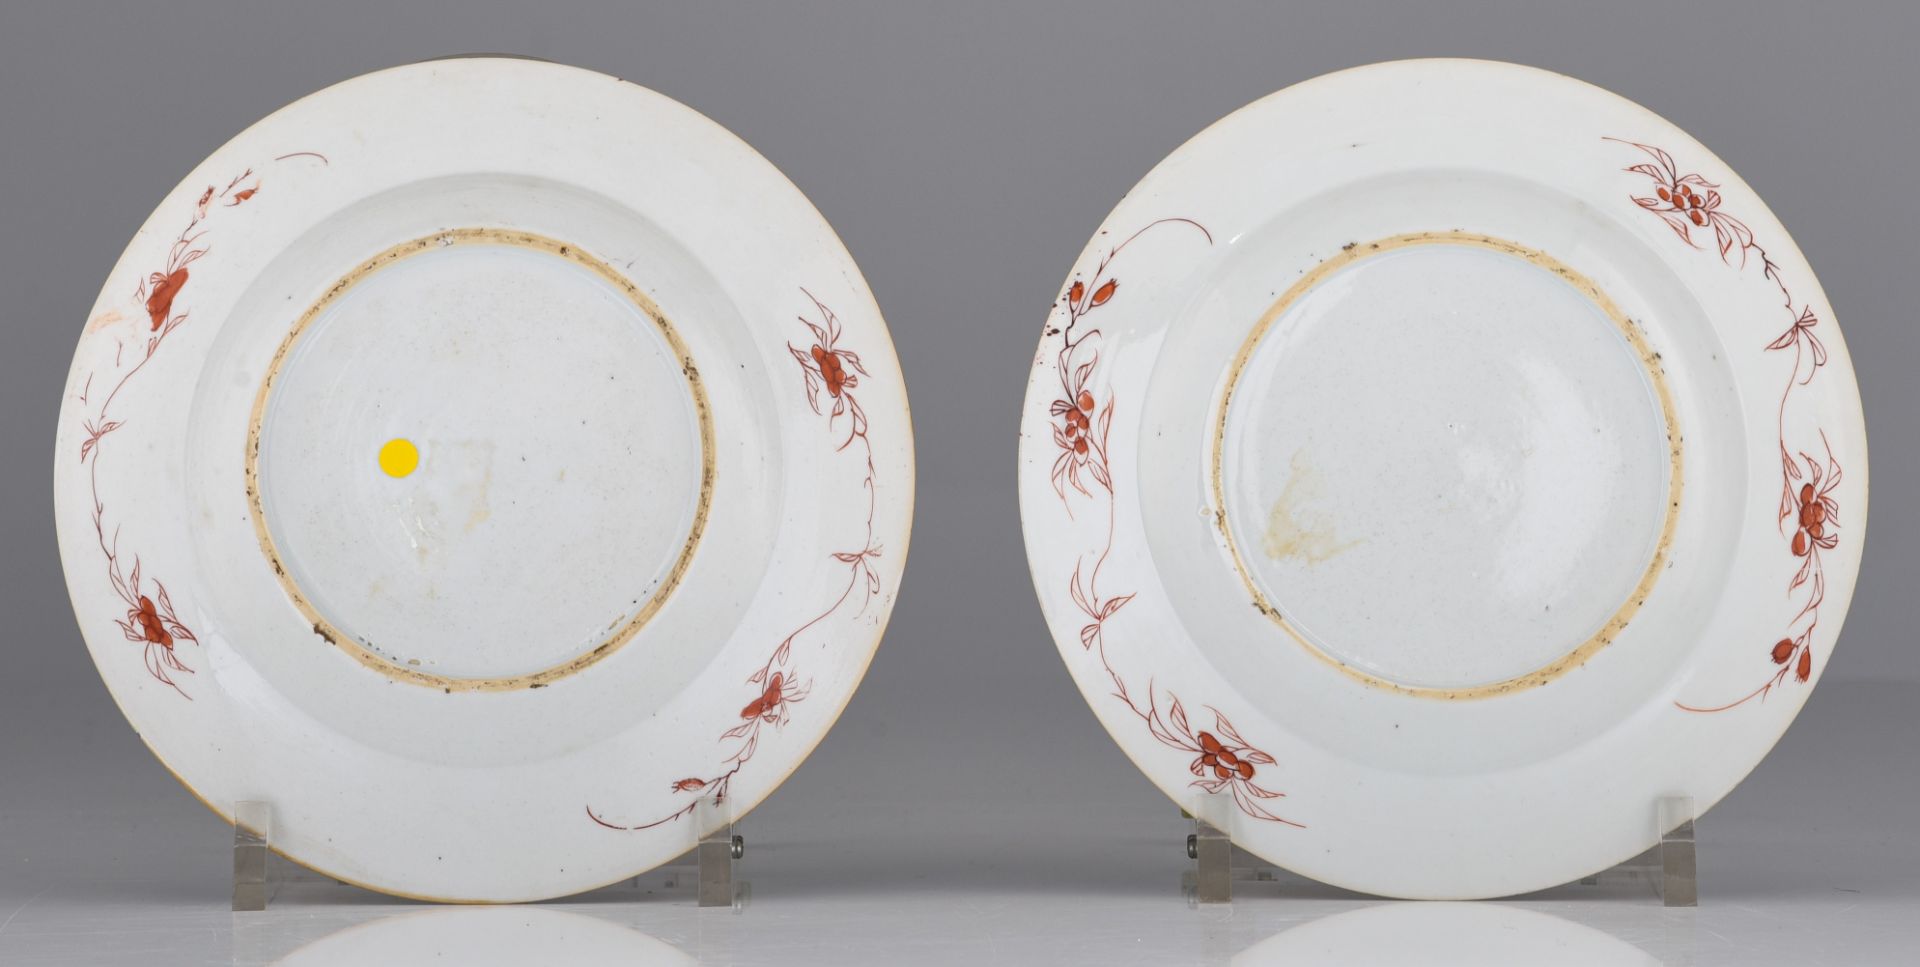 (BIDDING ONLY ON CARLOBONTE.BE) A collection of fine Chinese Imari figural export porcelain plates, - Image 7 of 10